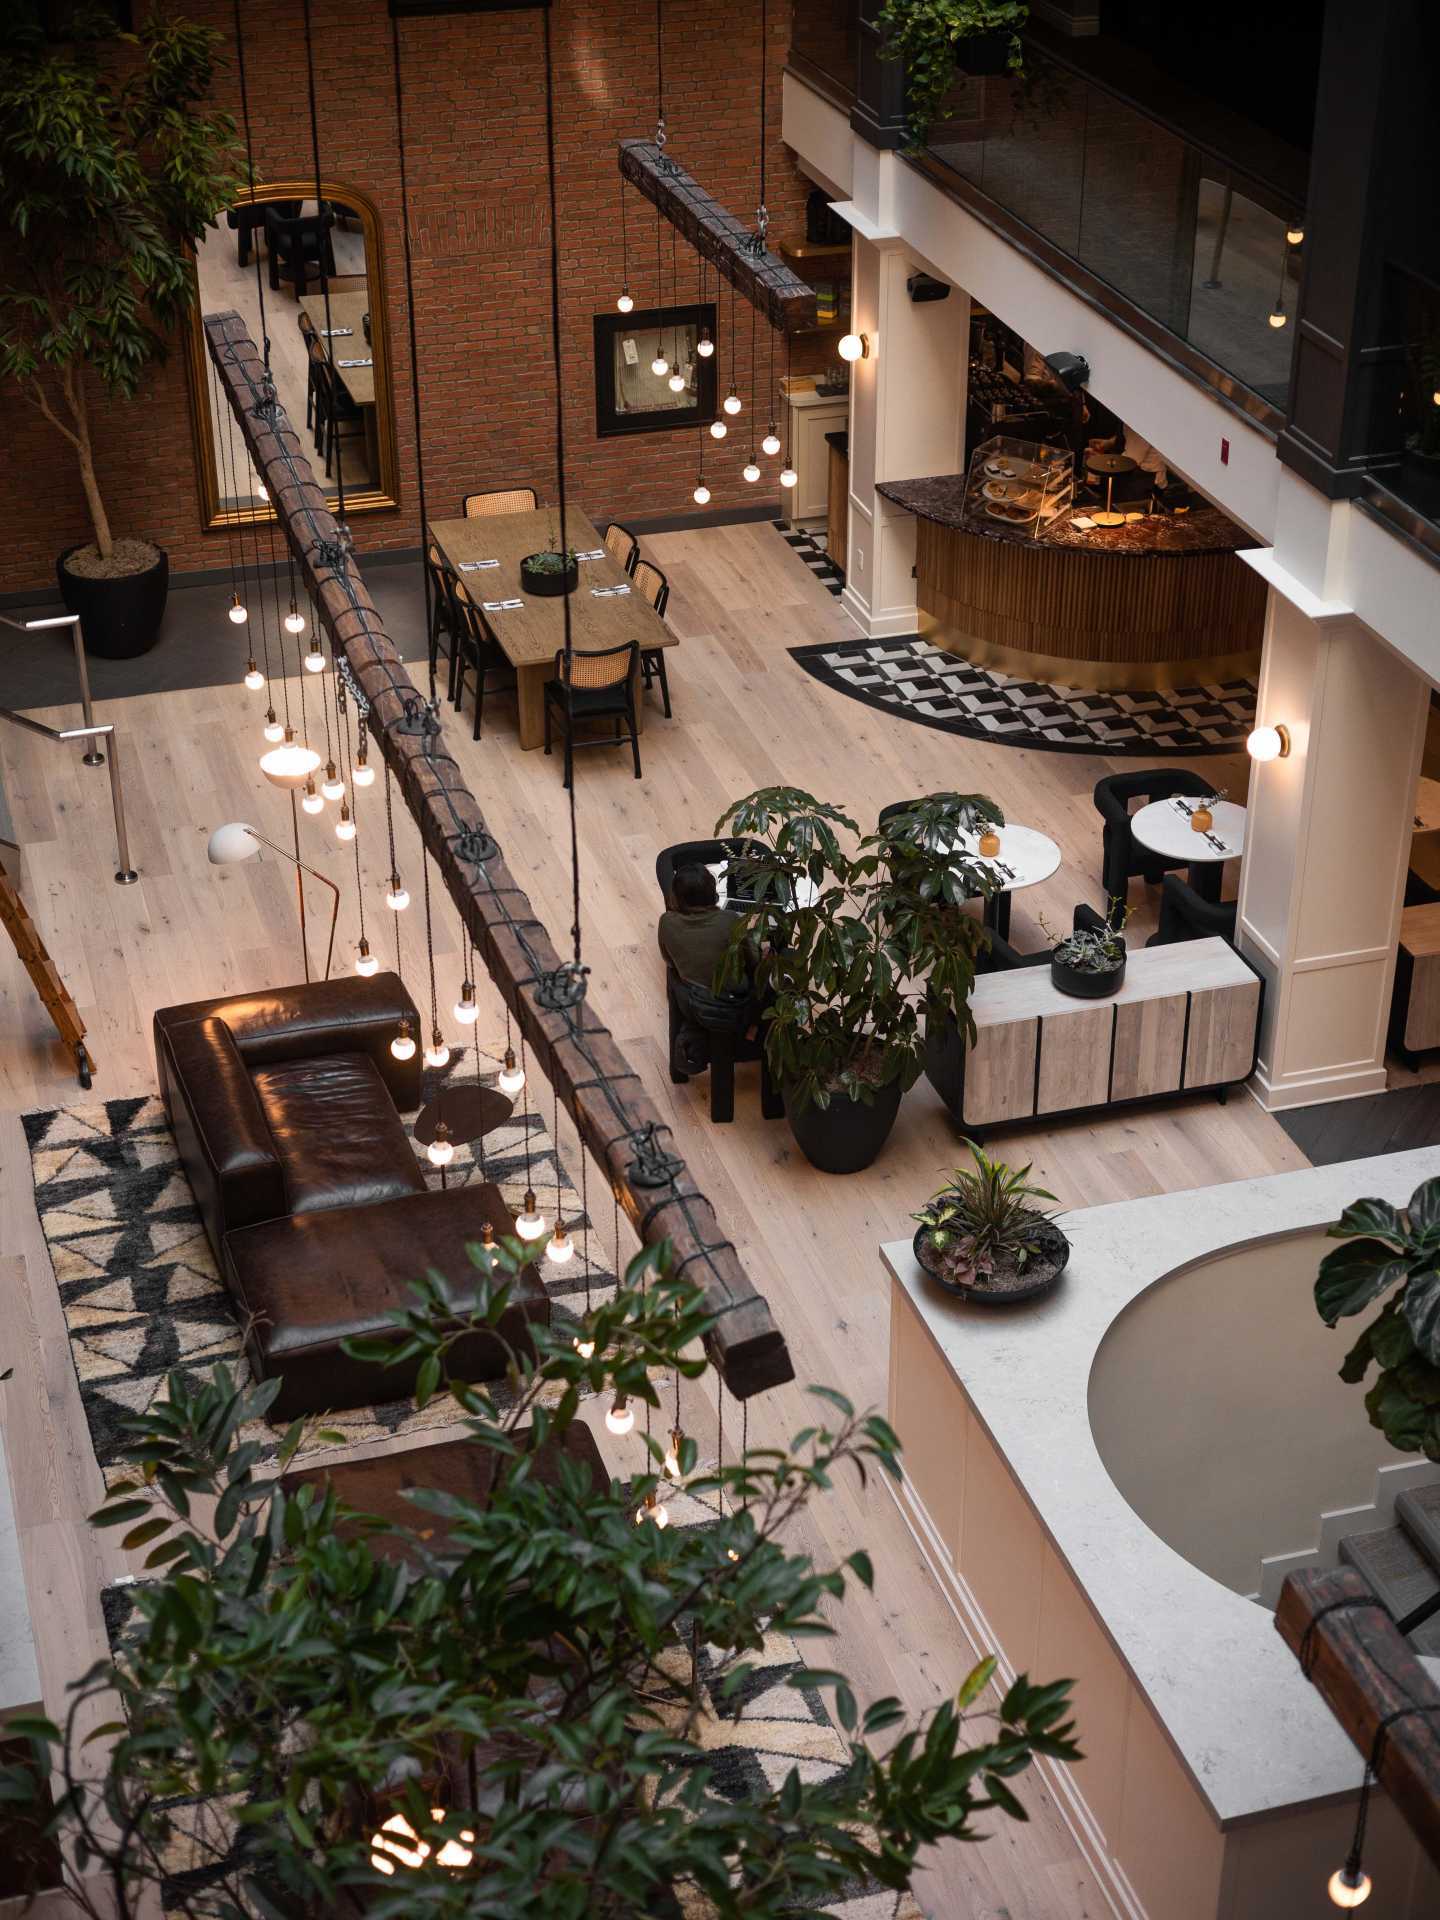 An overhead view of the Living Room at the Metcalfe hotel in downtown Ottawa